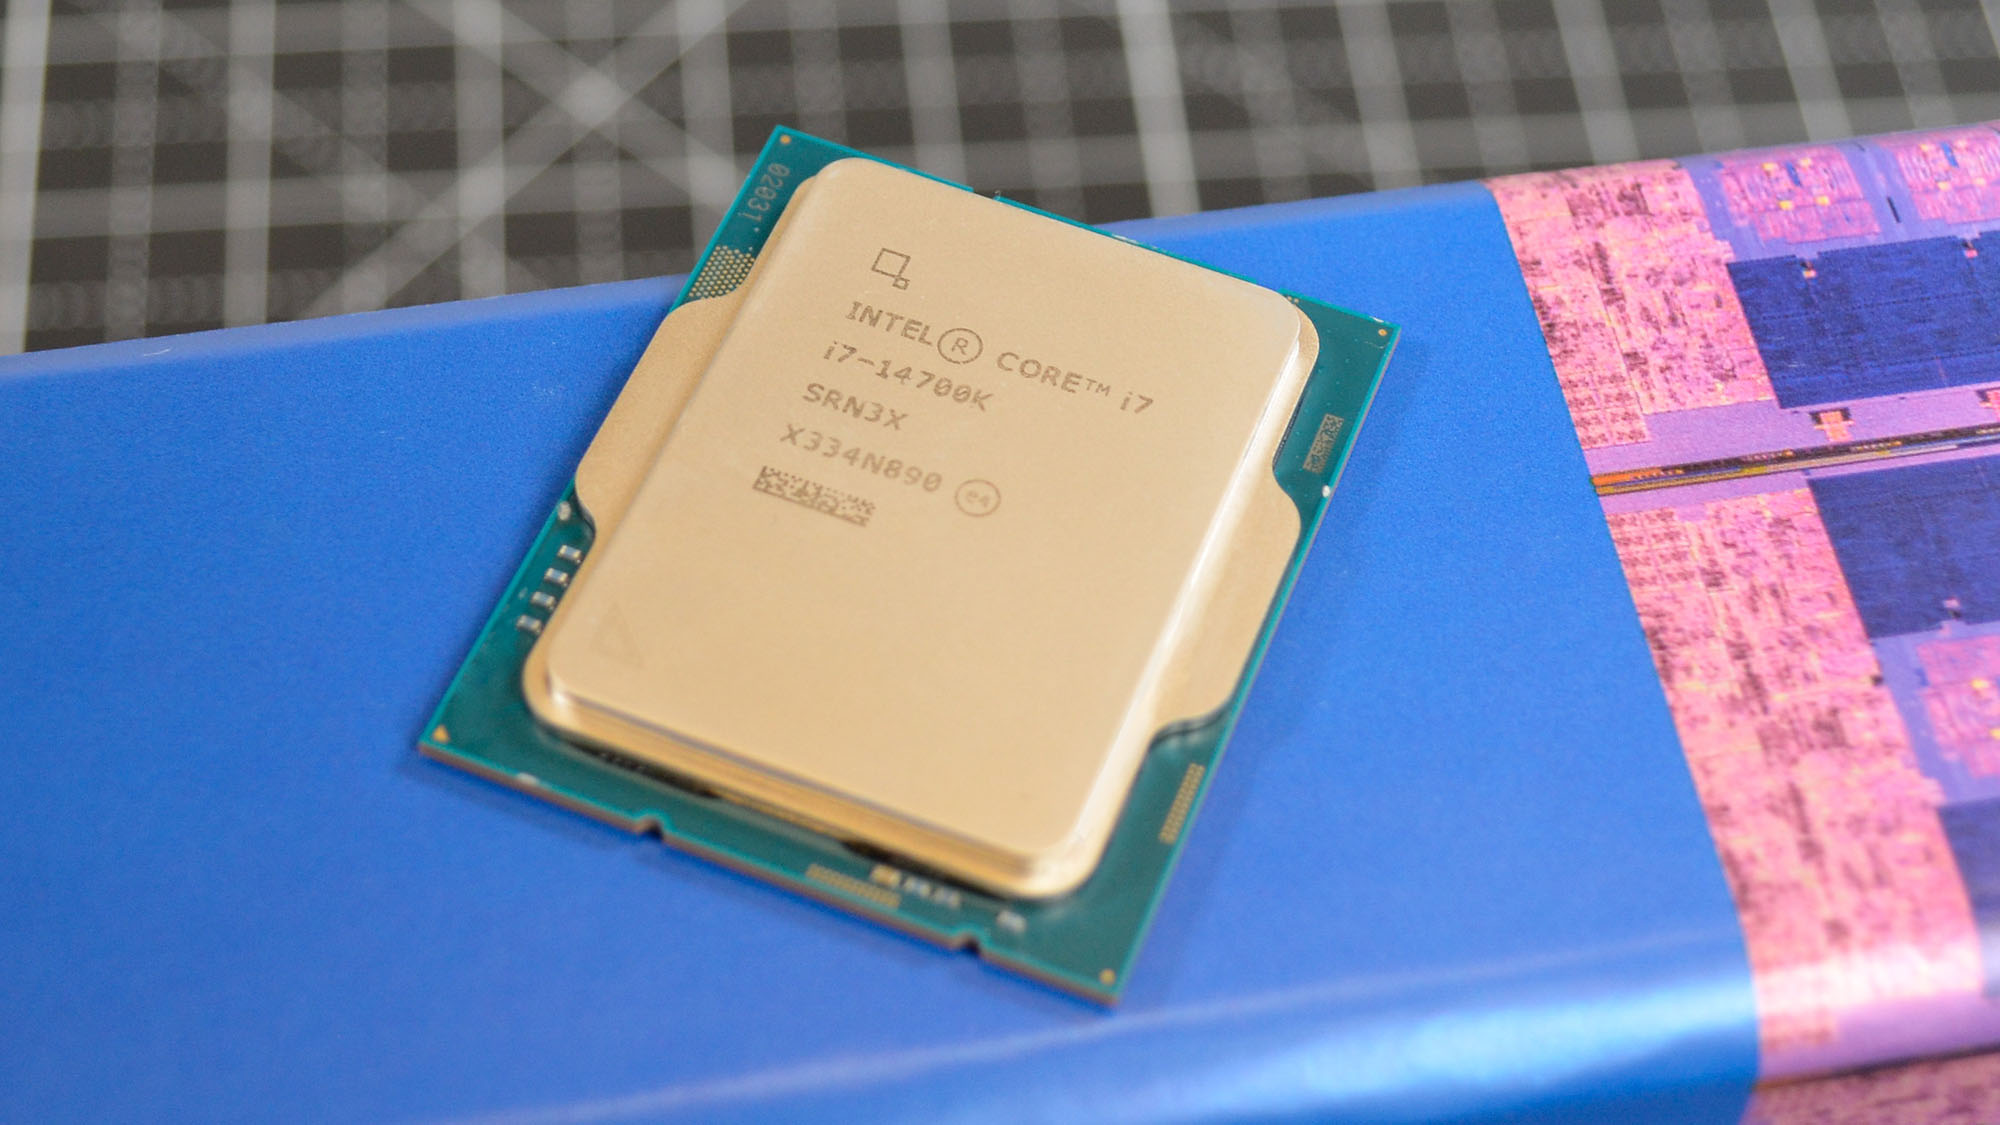 An Intel Core i7-14700K with its promotional packaging